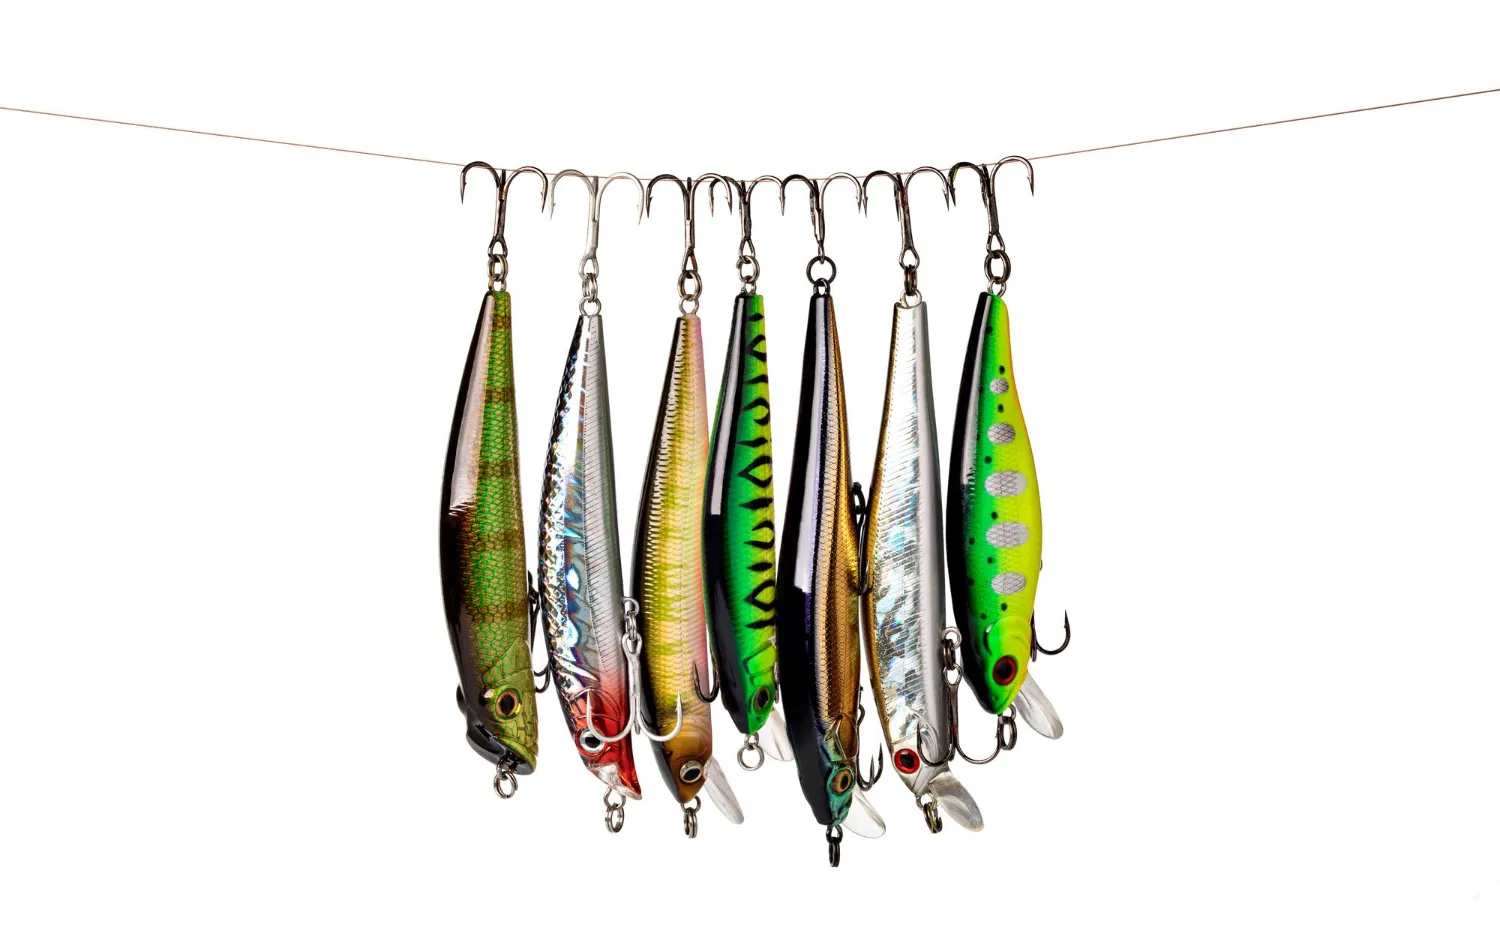 Tips for Choosing the Right Hard or Soft Bait